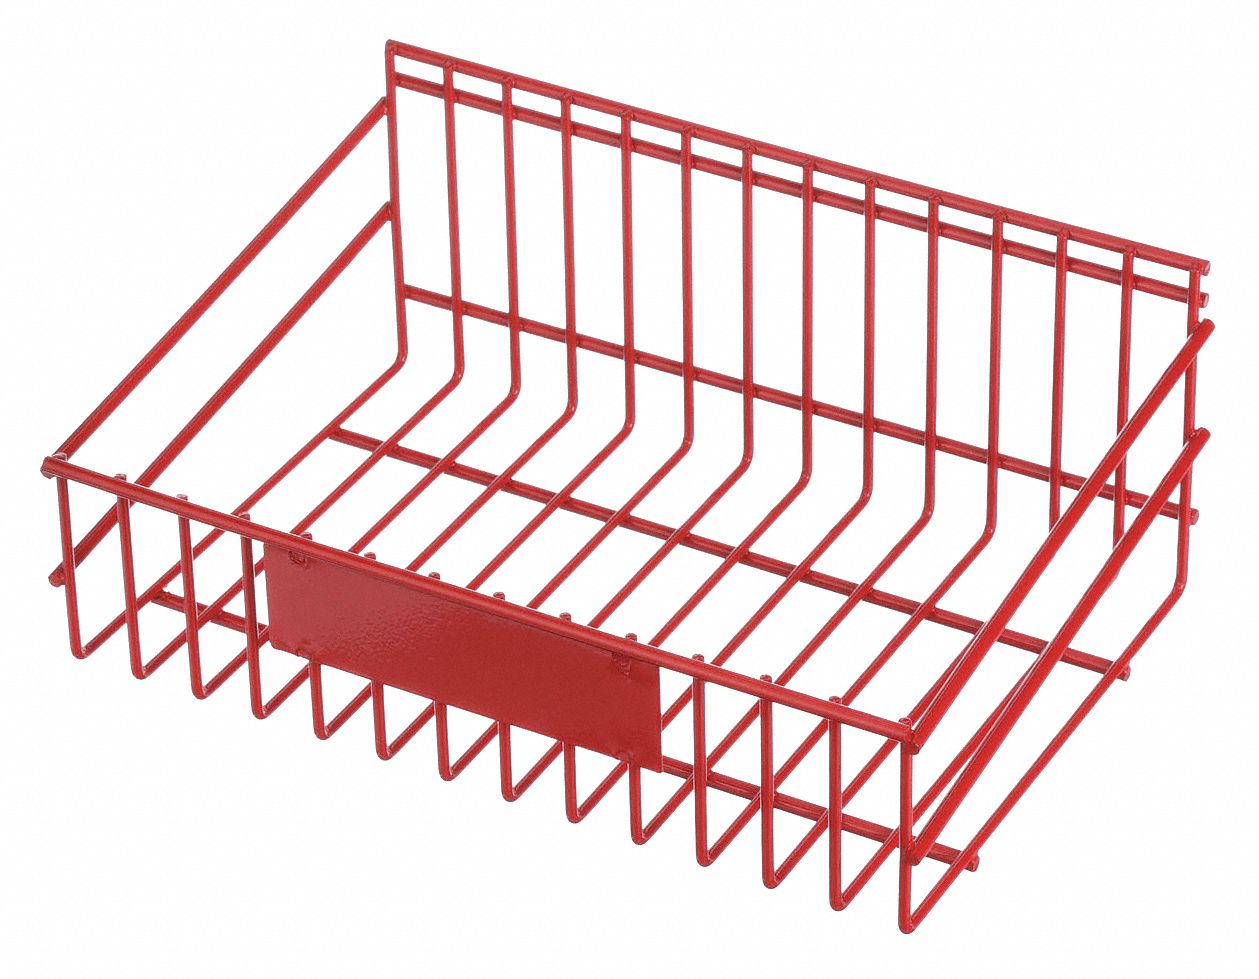 STORAGE BASKET, STEEL, CHROME-PLATED, RED, 13¾ IN OVERALL W